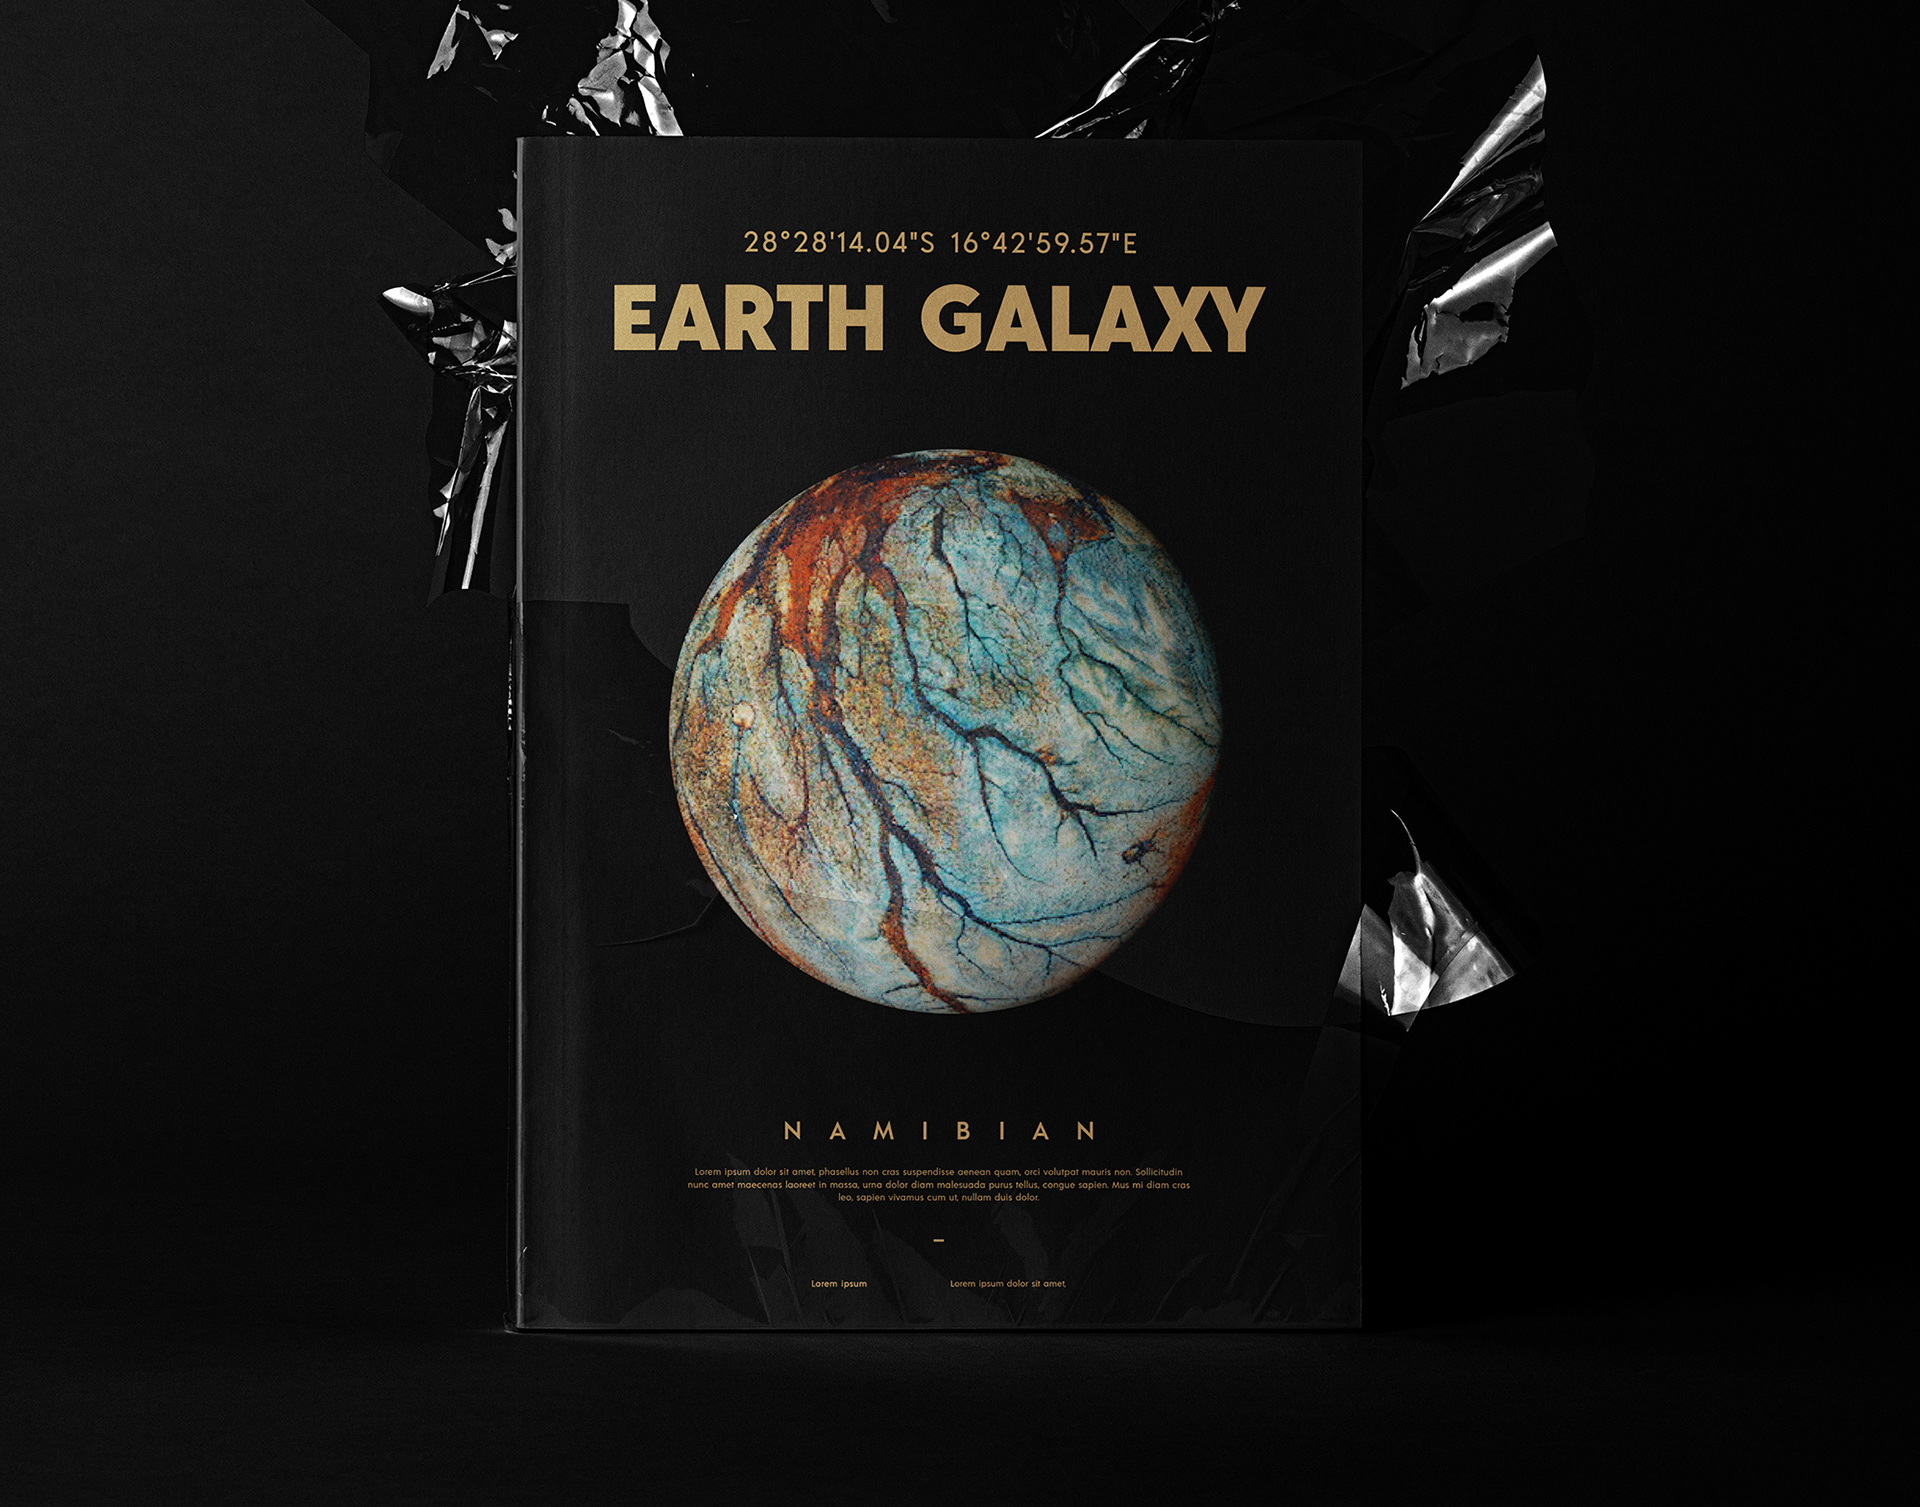 Earth Galaxy :: We made some new planets! on Behance53d34792139559.5e43bce99d420.jpg